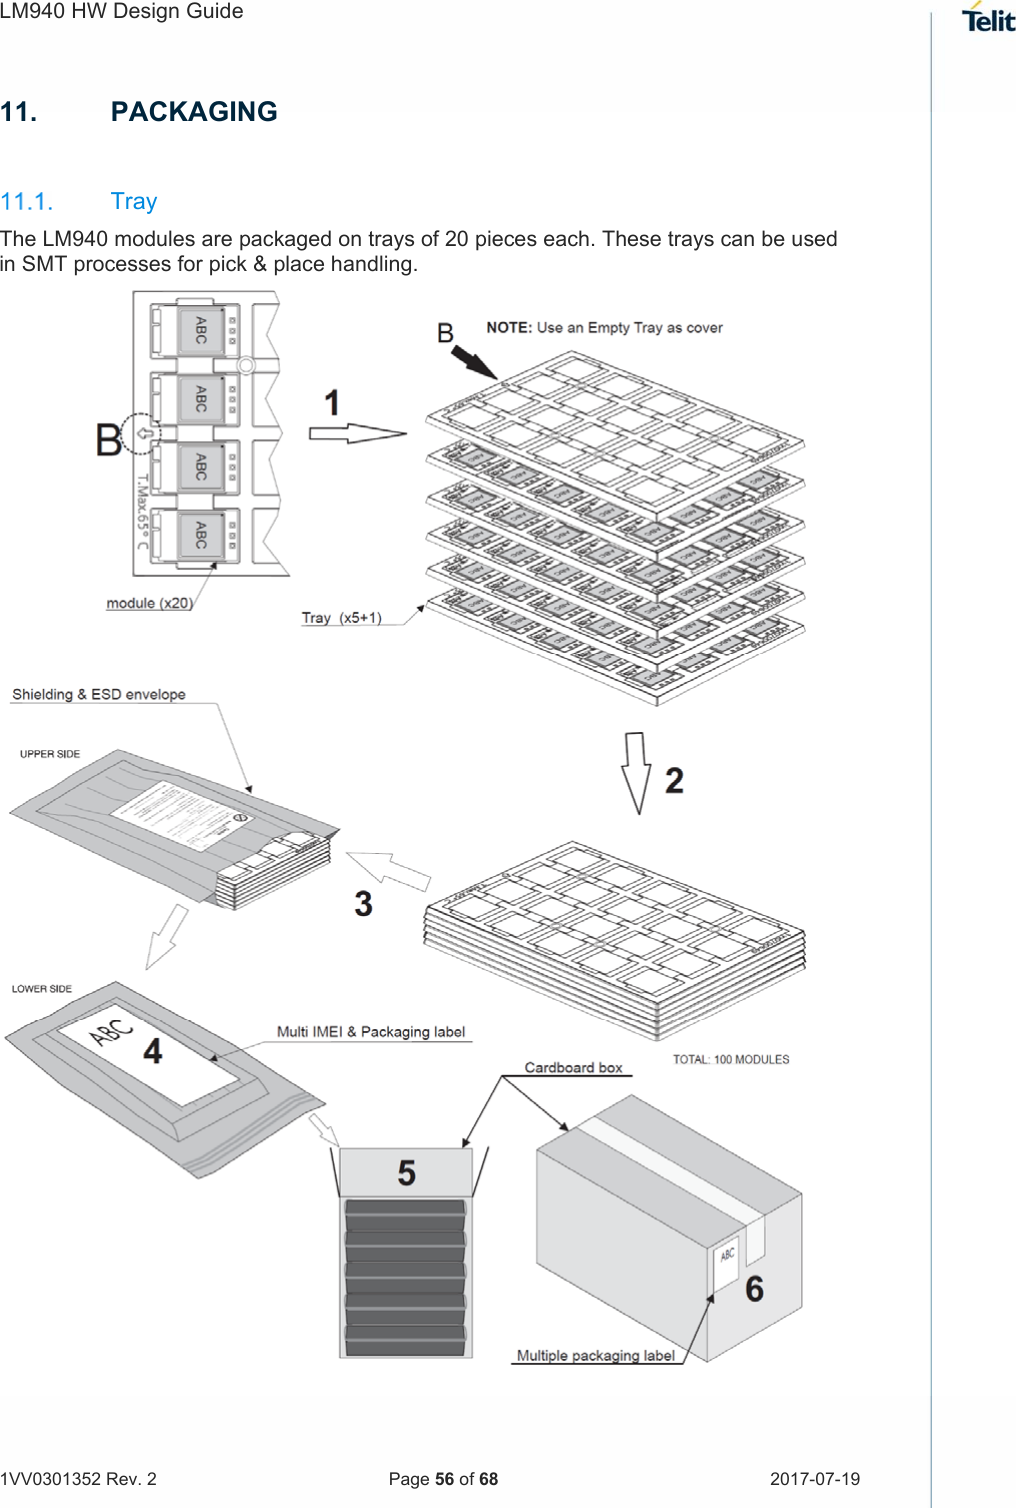 LM940 HW Design Guide   1VV0301352 Rev. 2   Page 56 of 68  2017-07-19  11.  PACKAGING   Tray The LM940 modules are packaged on trays of 20 pieces each. These trays can be used in SMT processes for pick &amp; place handling.   